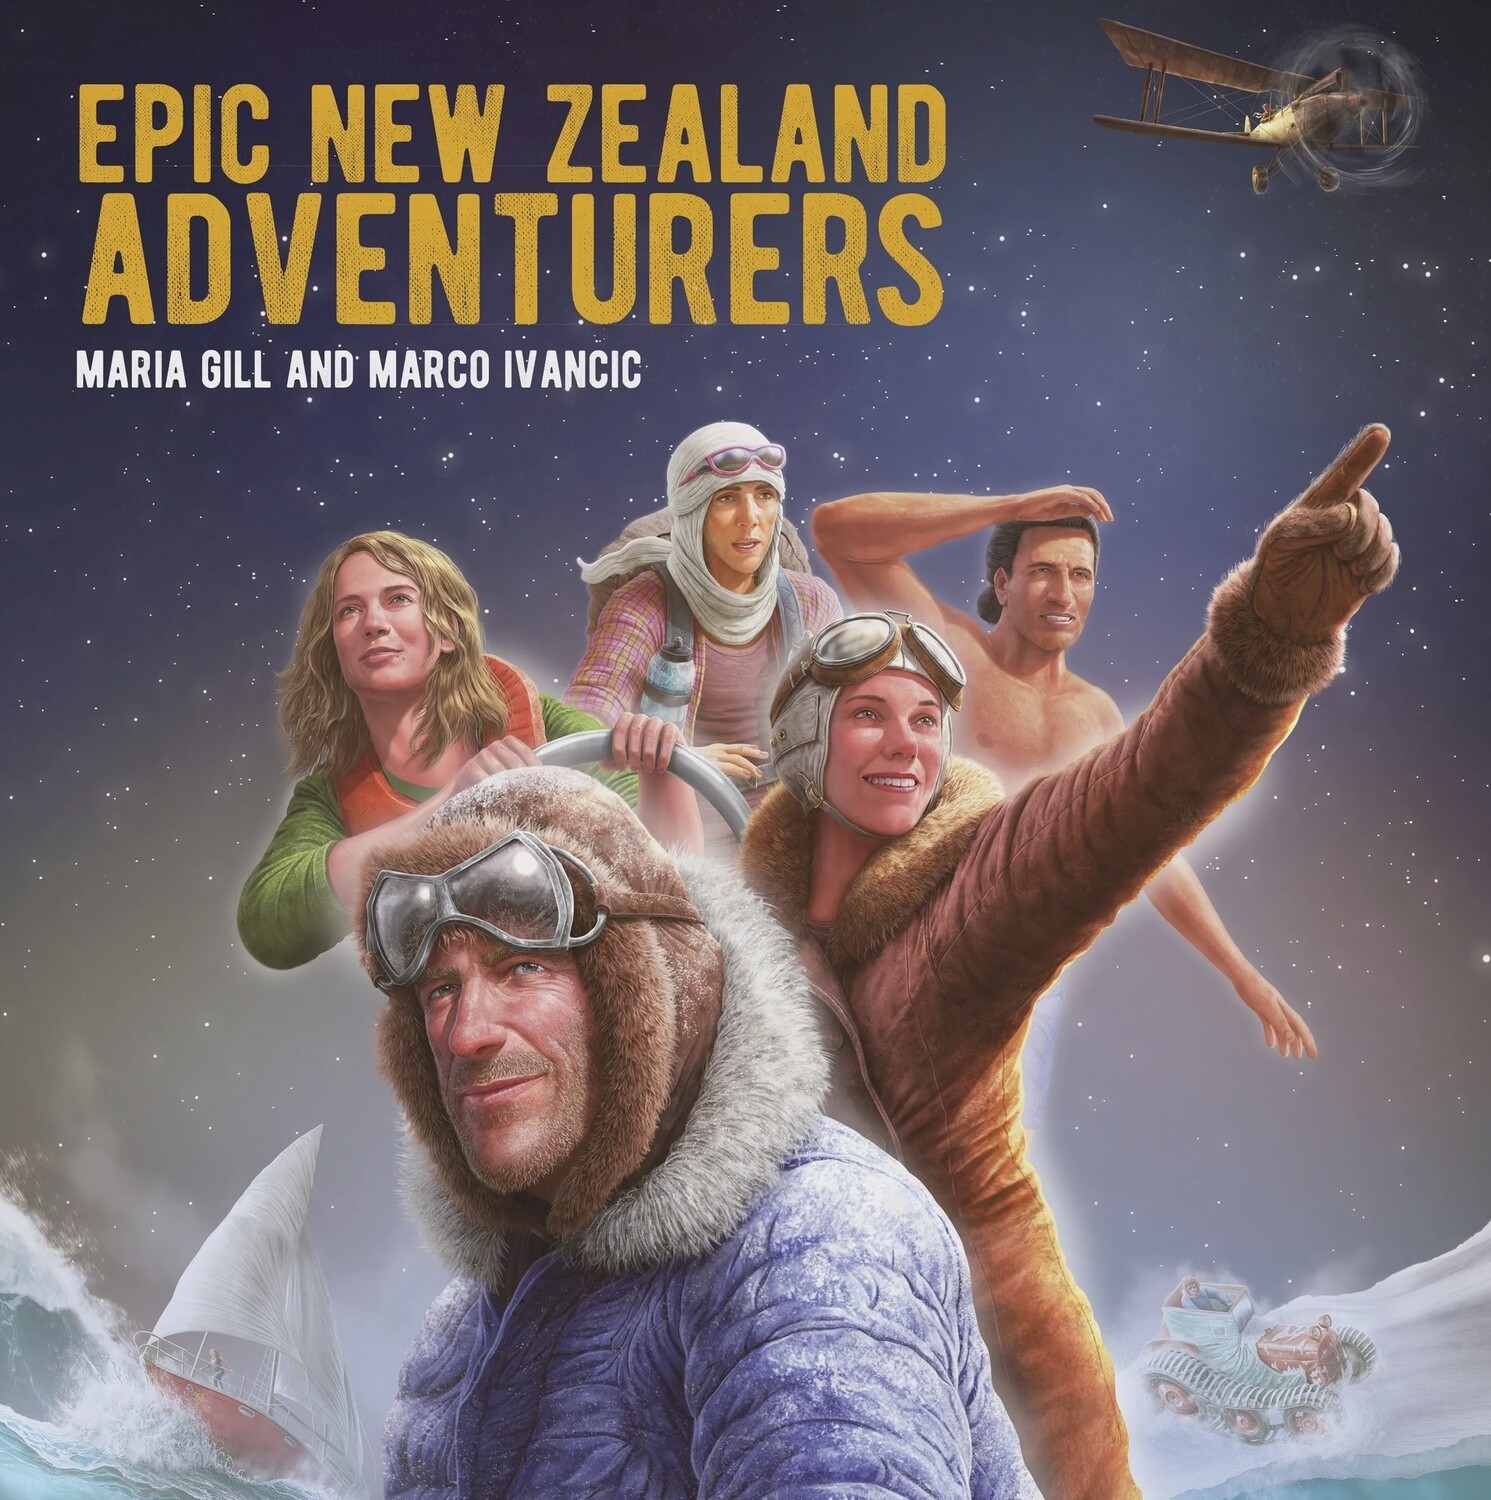 Epic New Zealand Adventurers by Maria Gill and Marco Ivancic